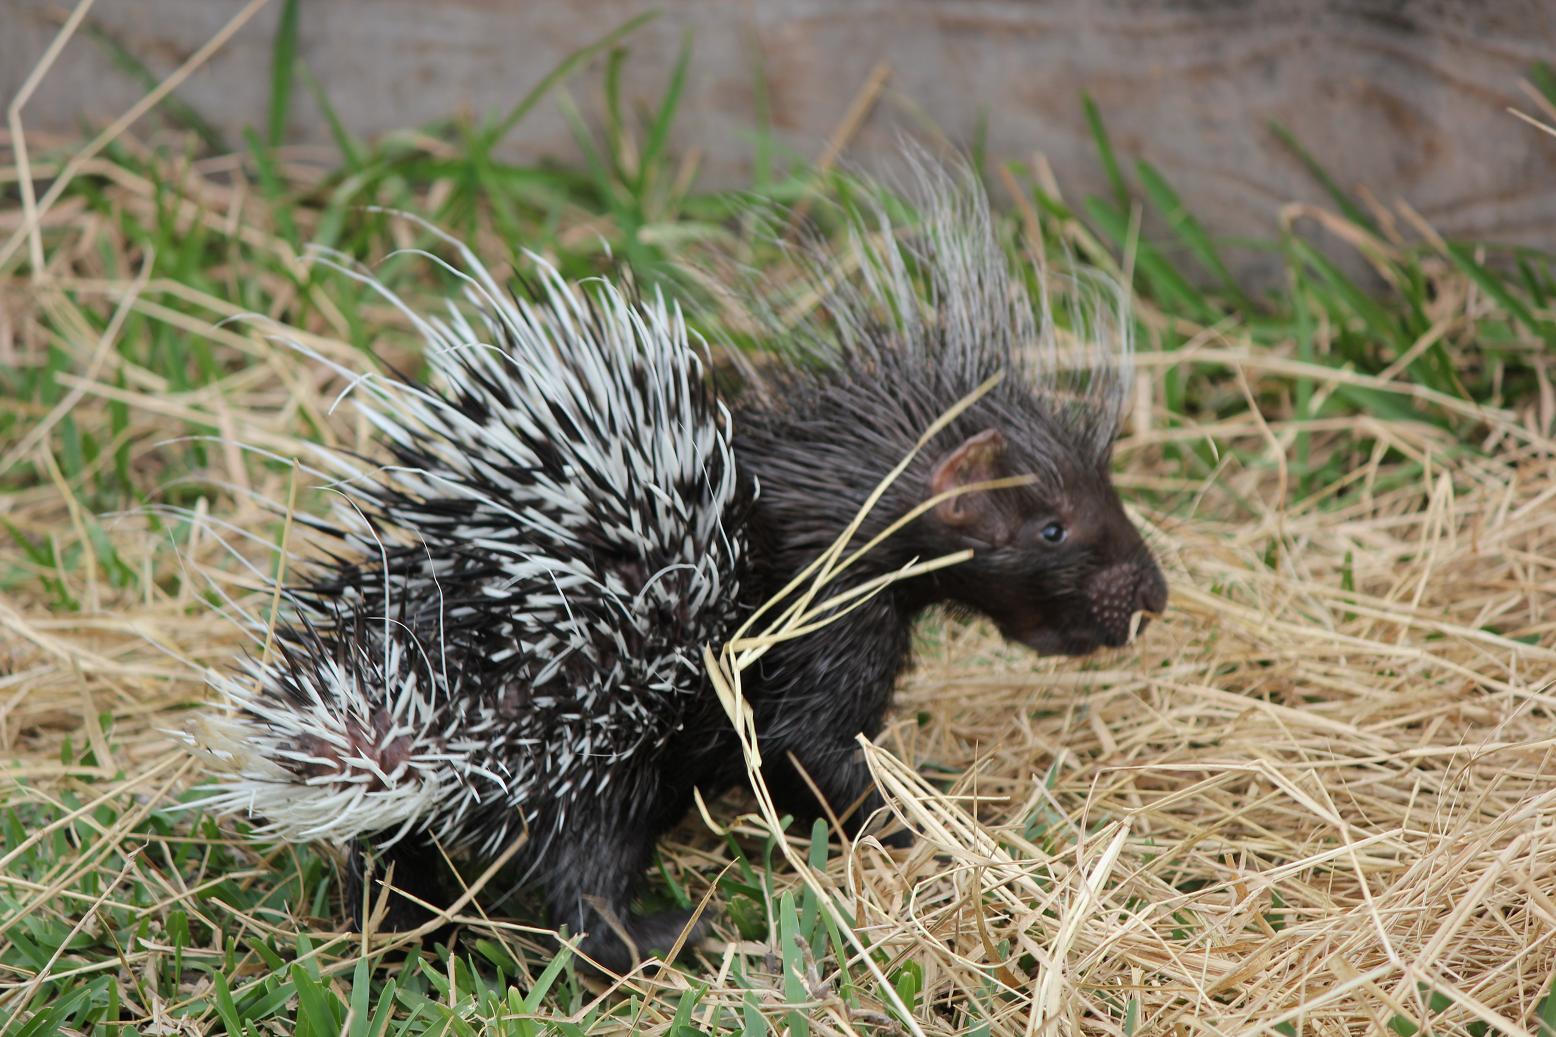 Funny Porcupine new latest Images | Funny And Cute Animals